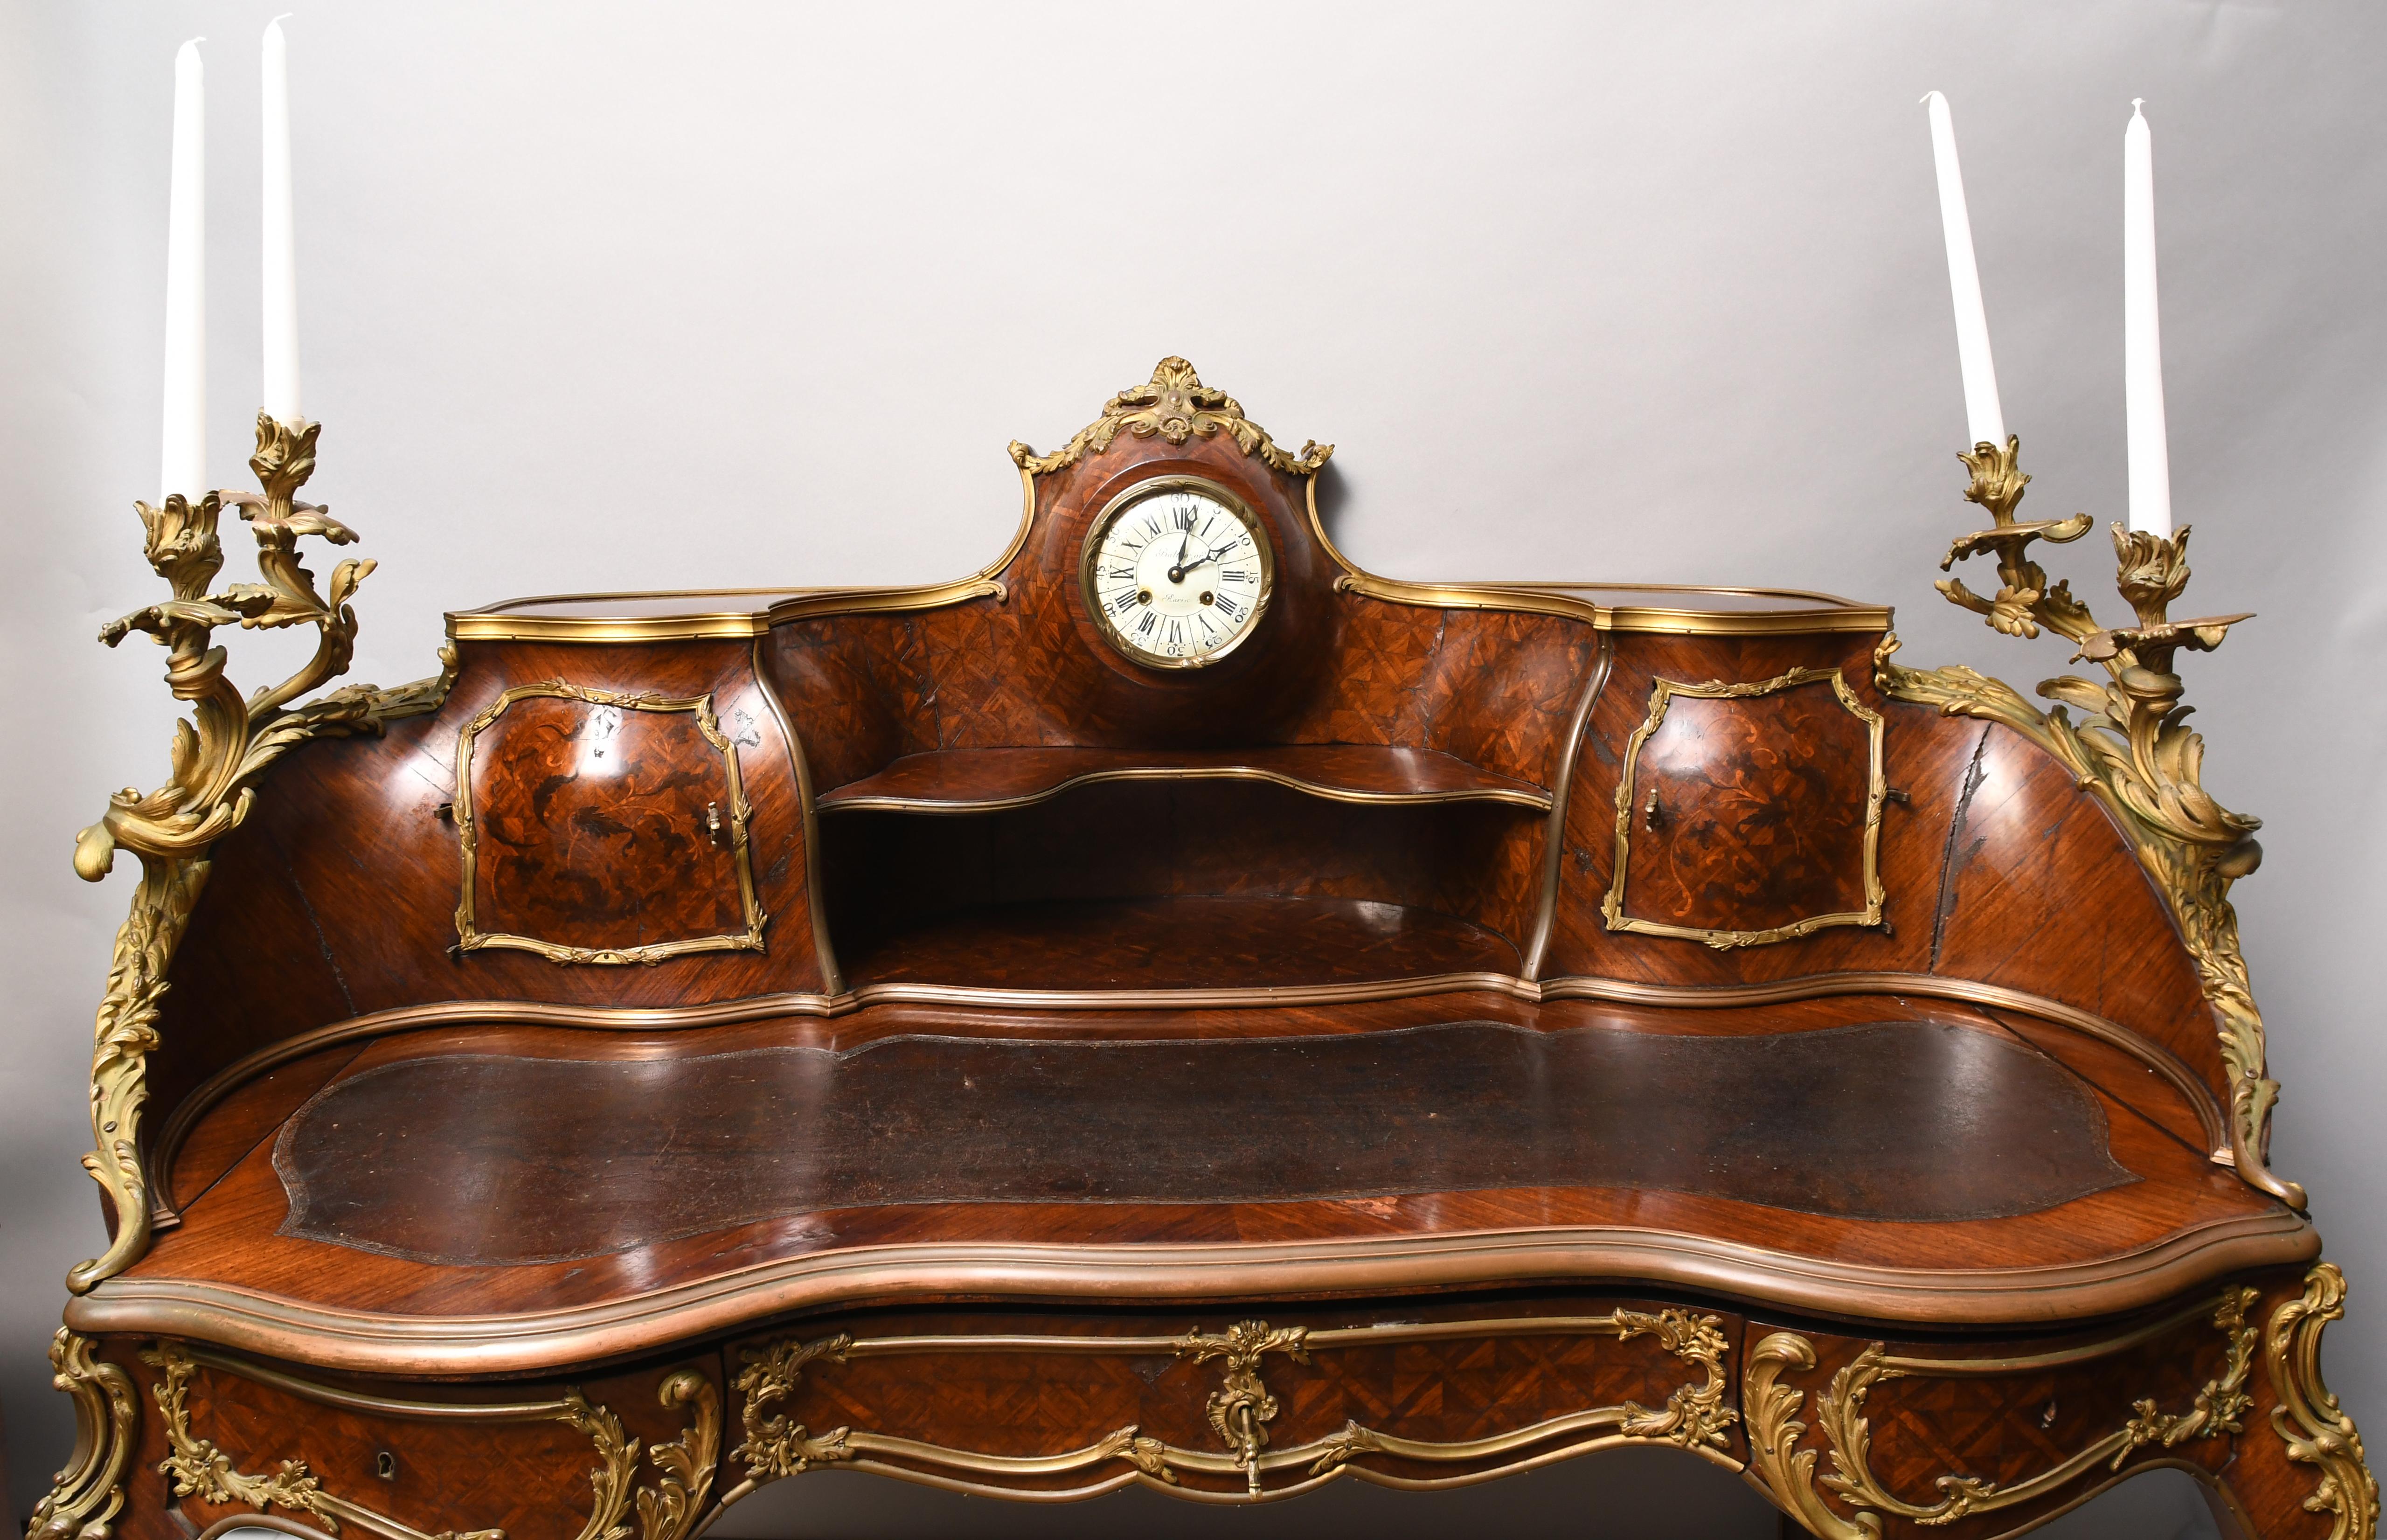 Bureau has four acanthus leaves cast candleholders, leather top desk with two compartments and three frieze drawers. It is supported by four cabriole legs with acanthus leaves scrolling mounts on the knee. The porcelain dial with Roman number signed